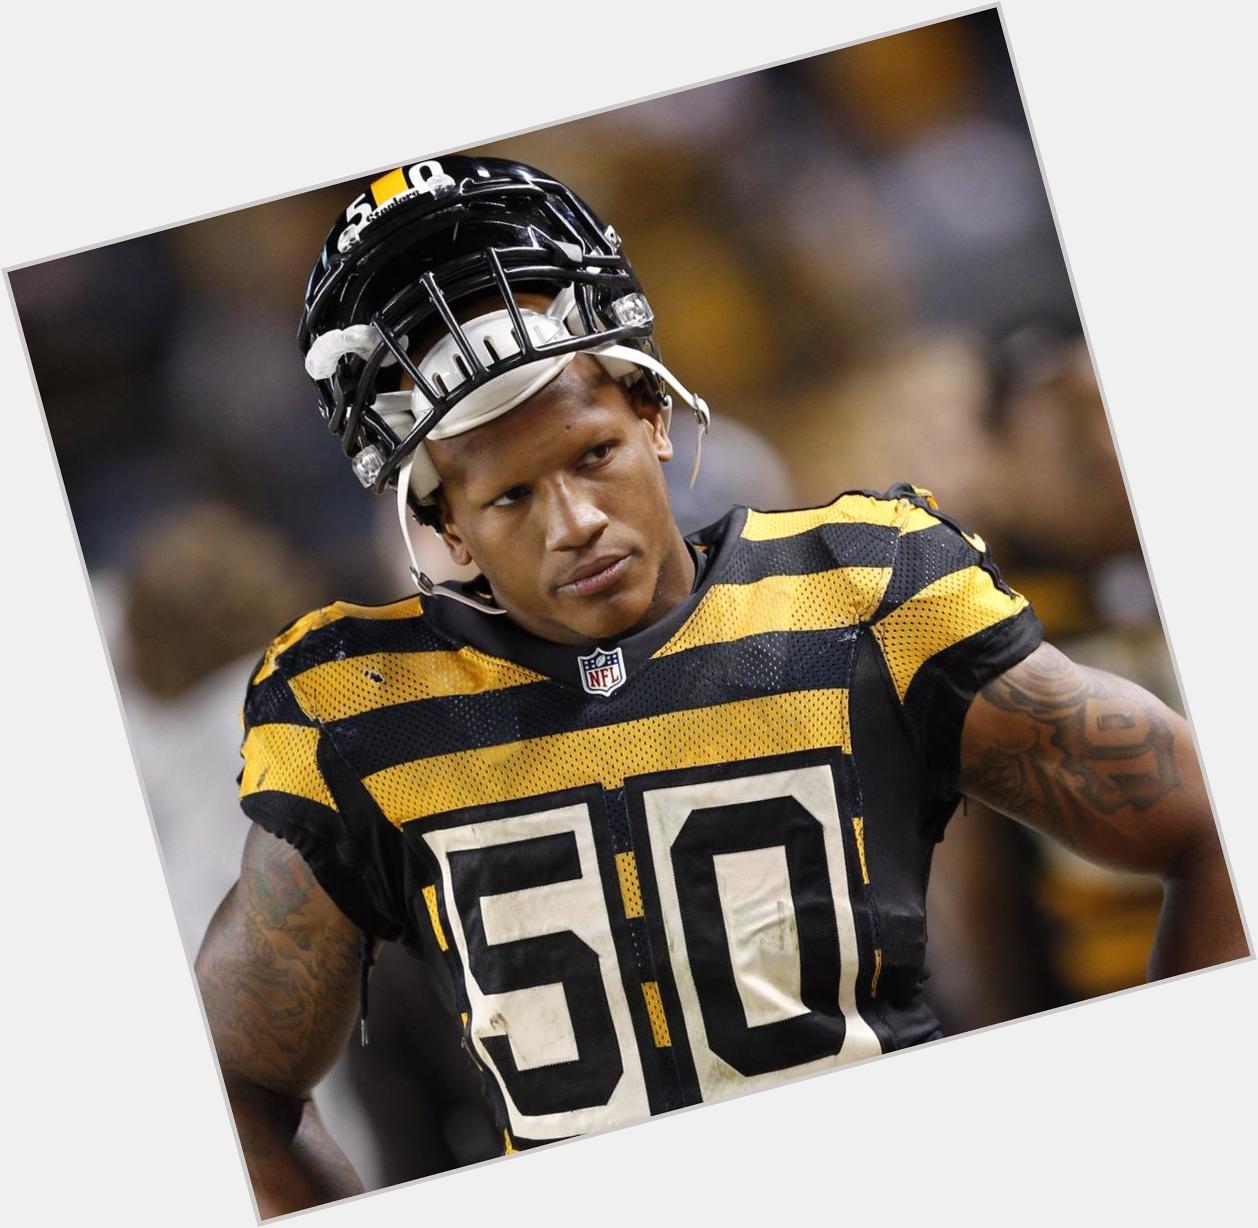 HAPPY BIRTHDAY TO THE PITTSBURGH STEELERS VERY OWN, RYAN SHAZIER 